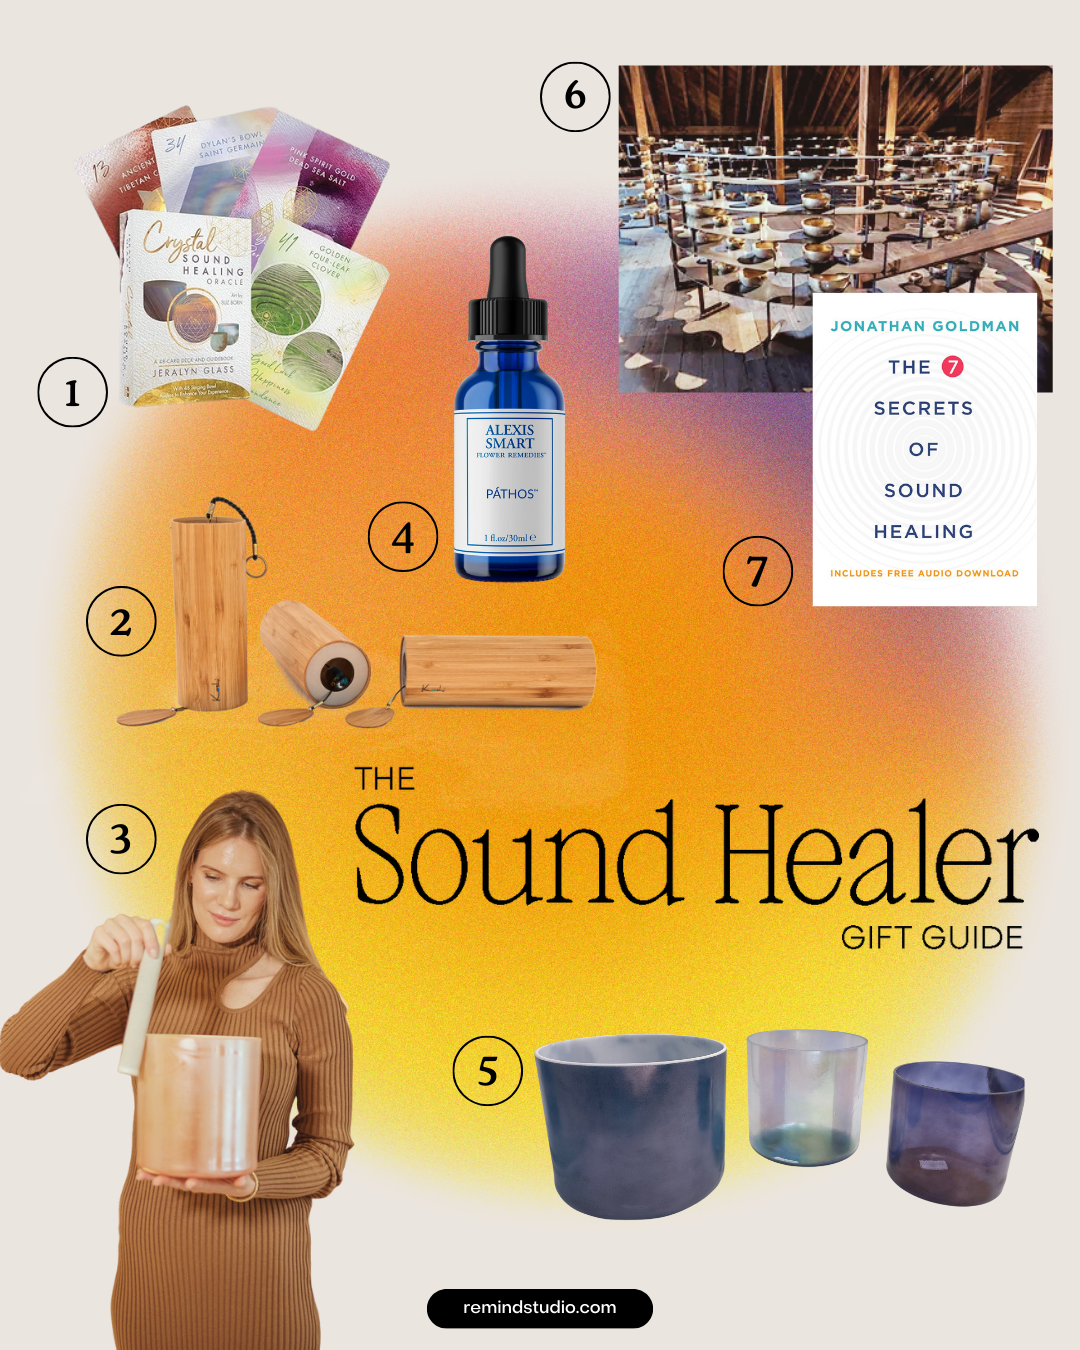 The Sound Healer Gift Guide